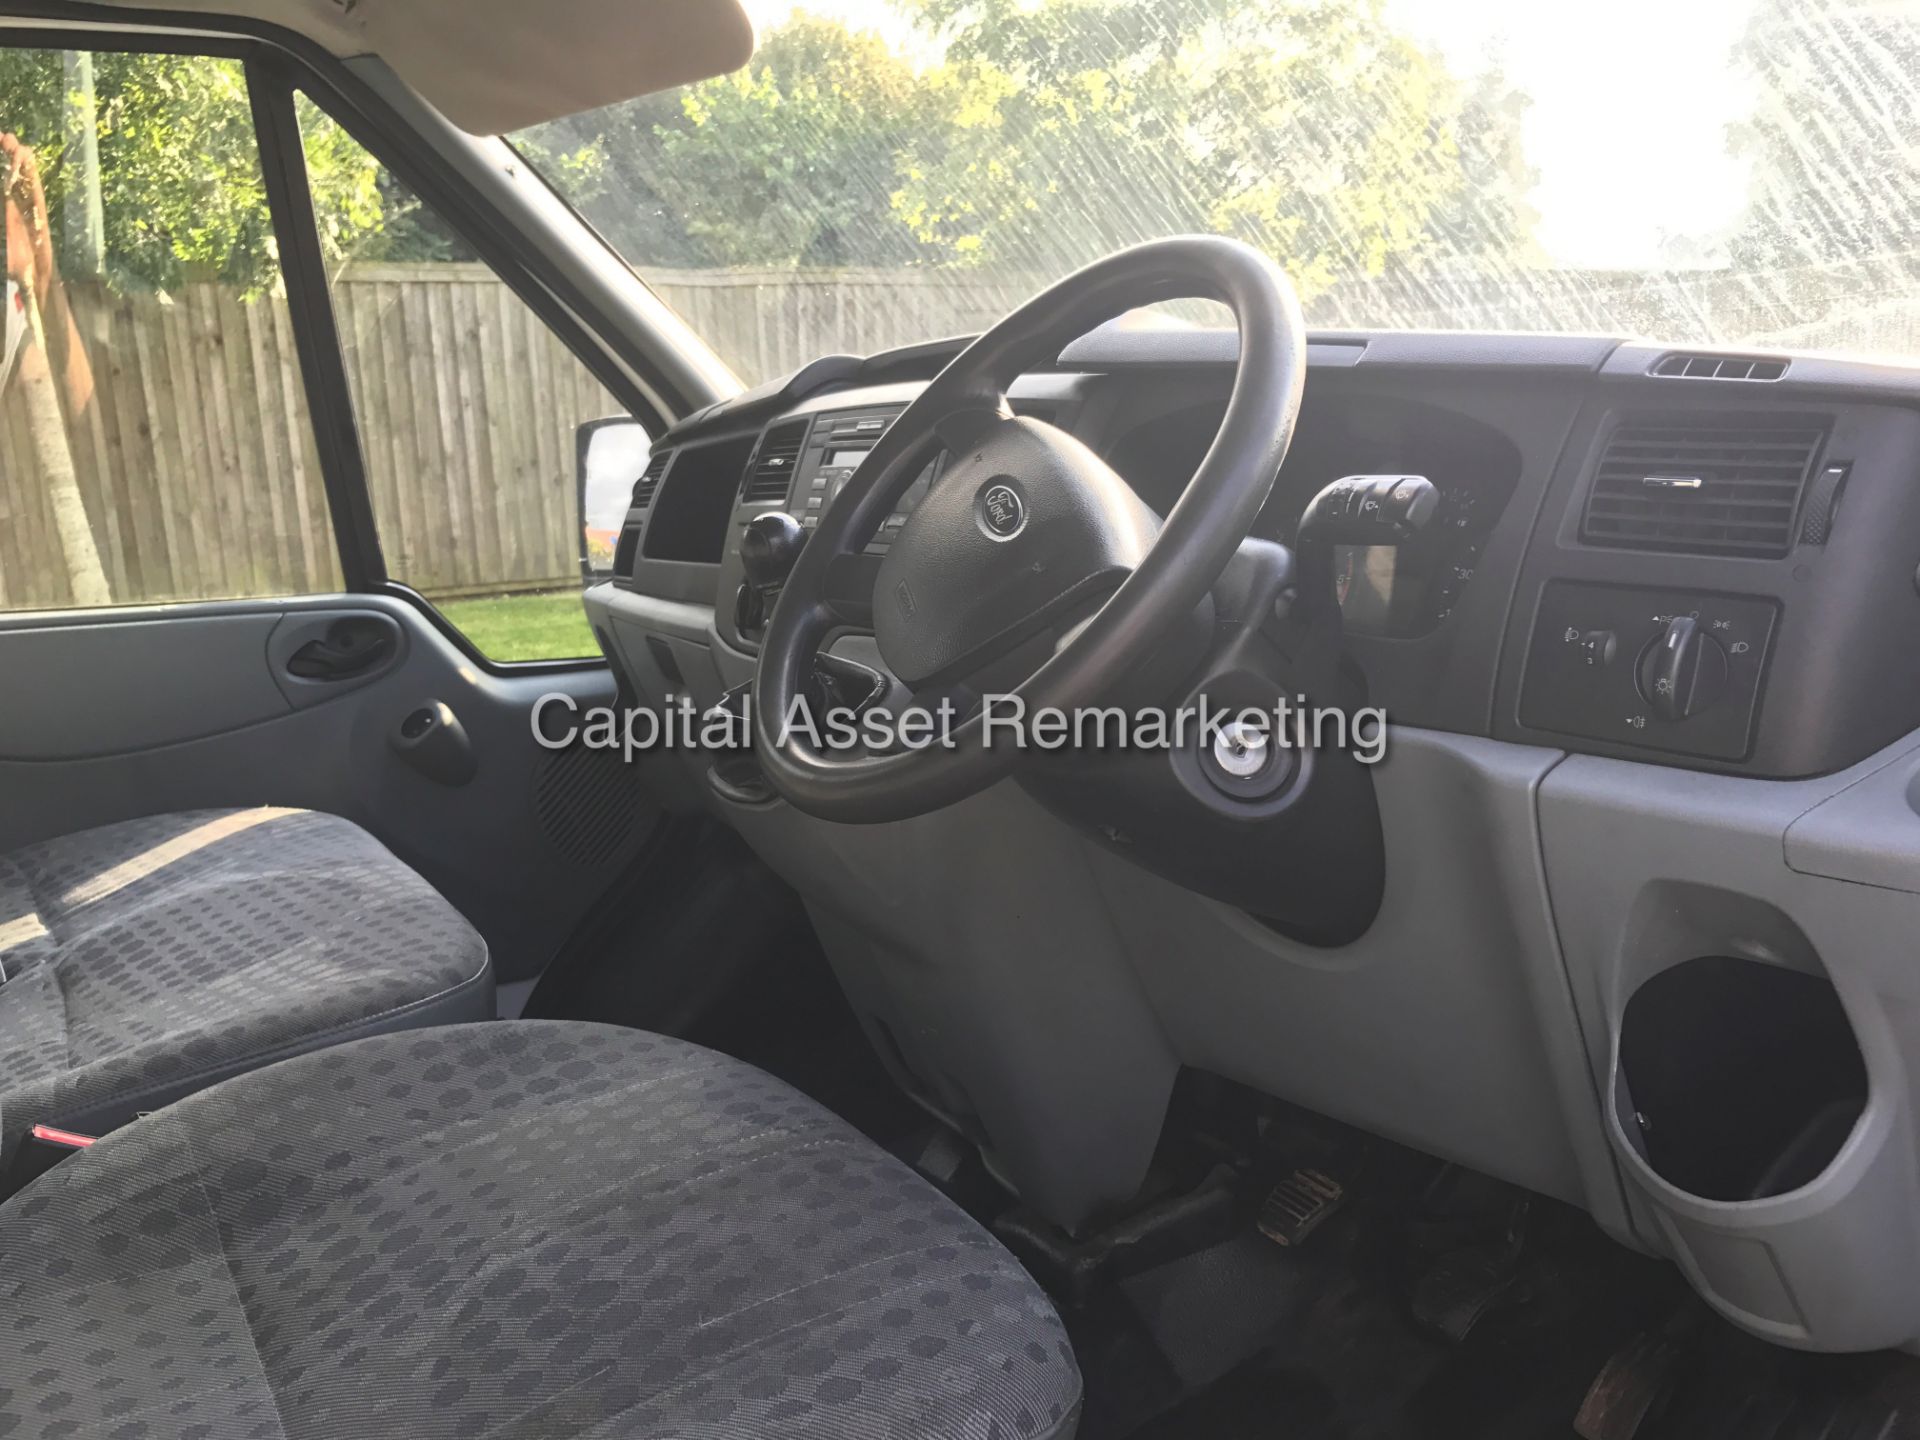 (ON SALE)FORD TRANSIT 2.4TDCI "115PSI / 6 SPEED" T350 - LWB / HIGH TOP (11 REG) LOW MILEAGE - - Image 9 of 18